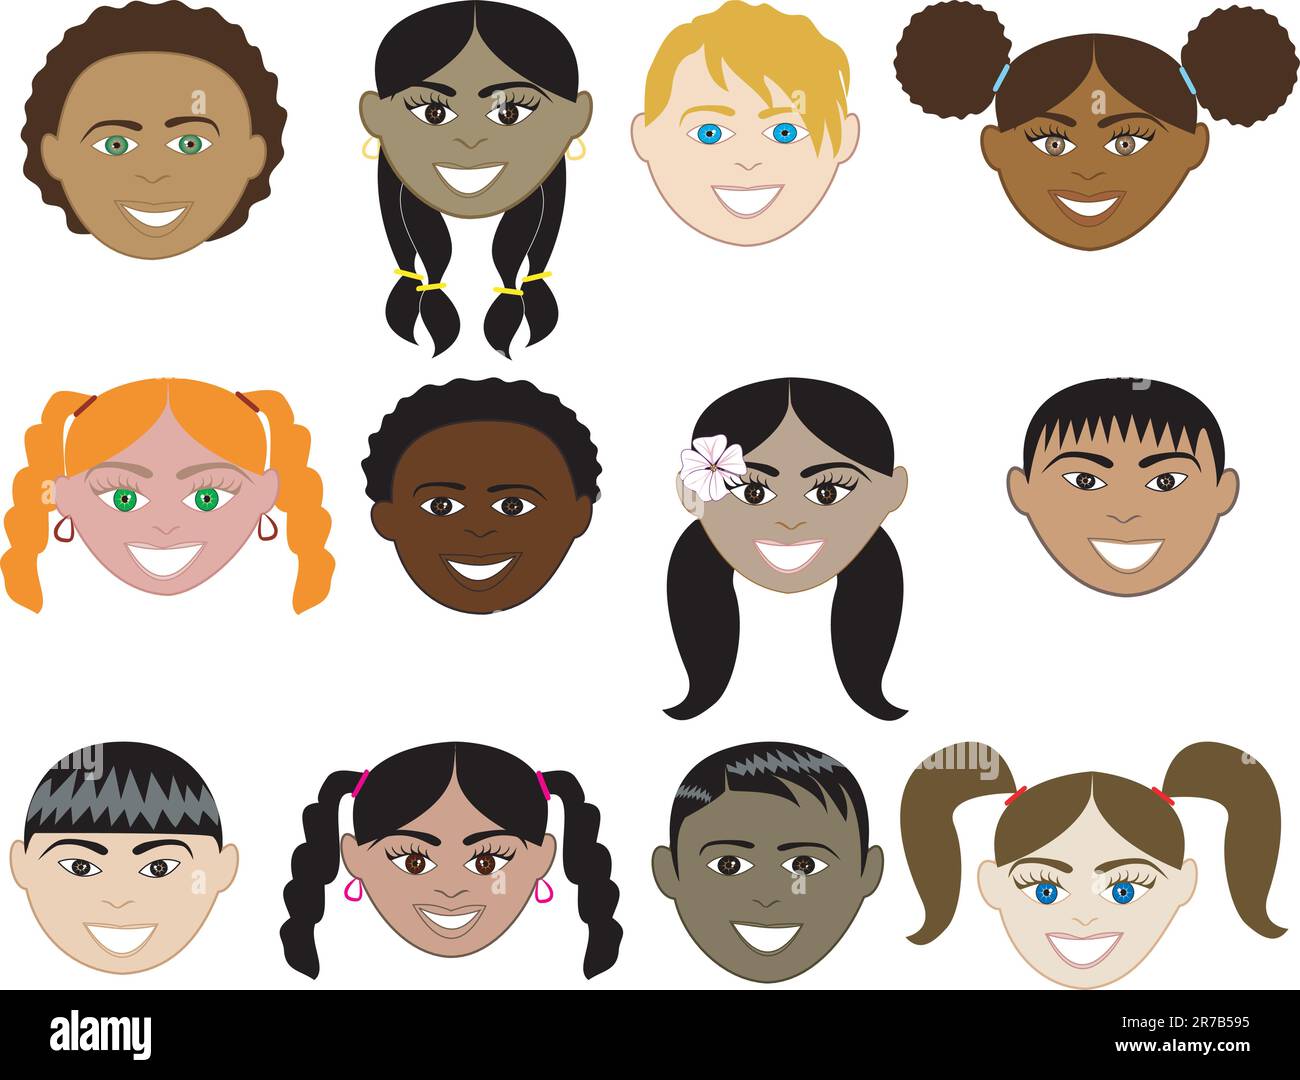 Vector Illustration of 12 boy and girl faces with smiles. Stock Vector